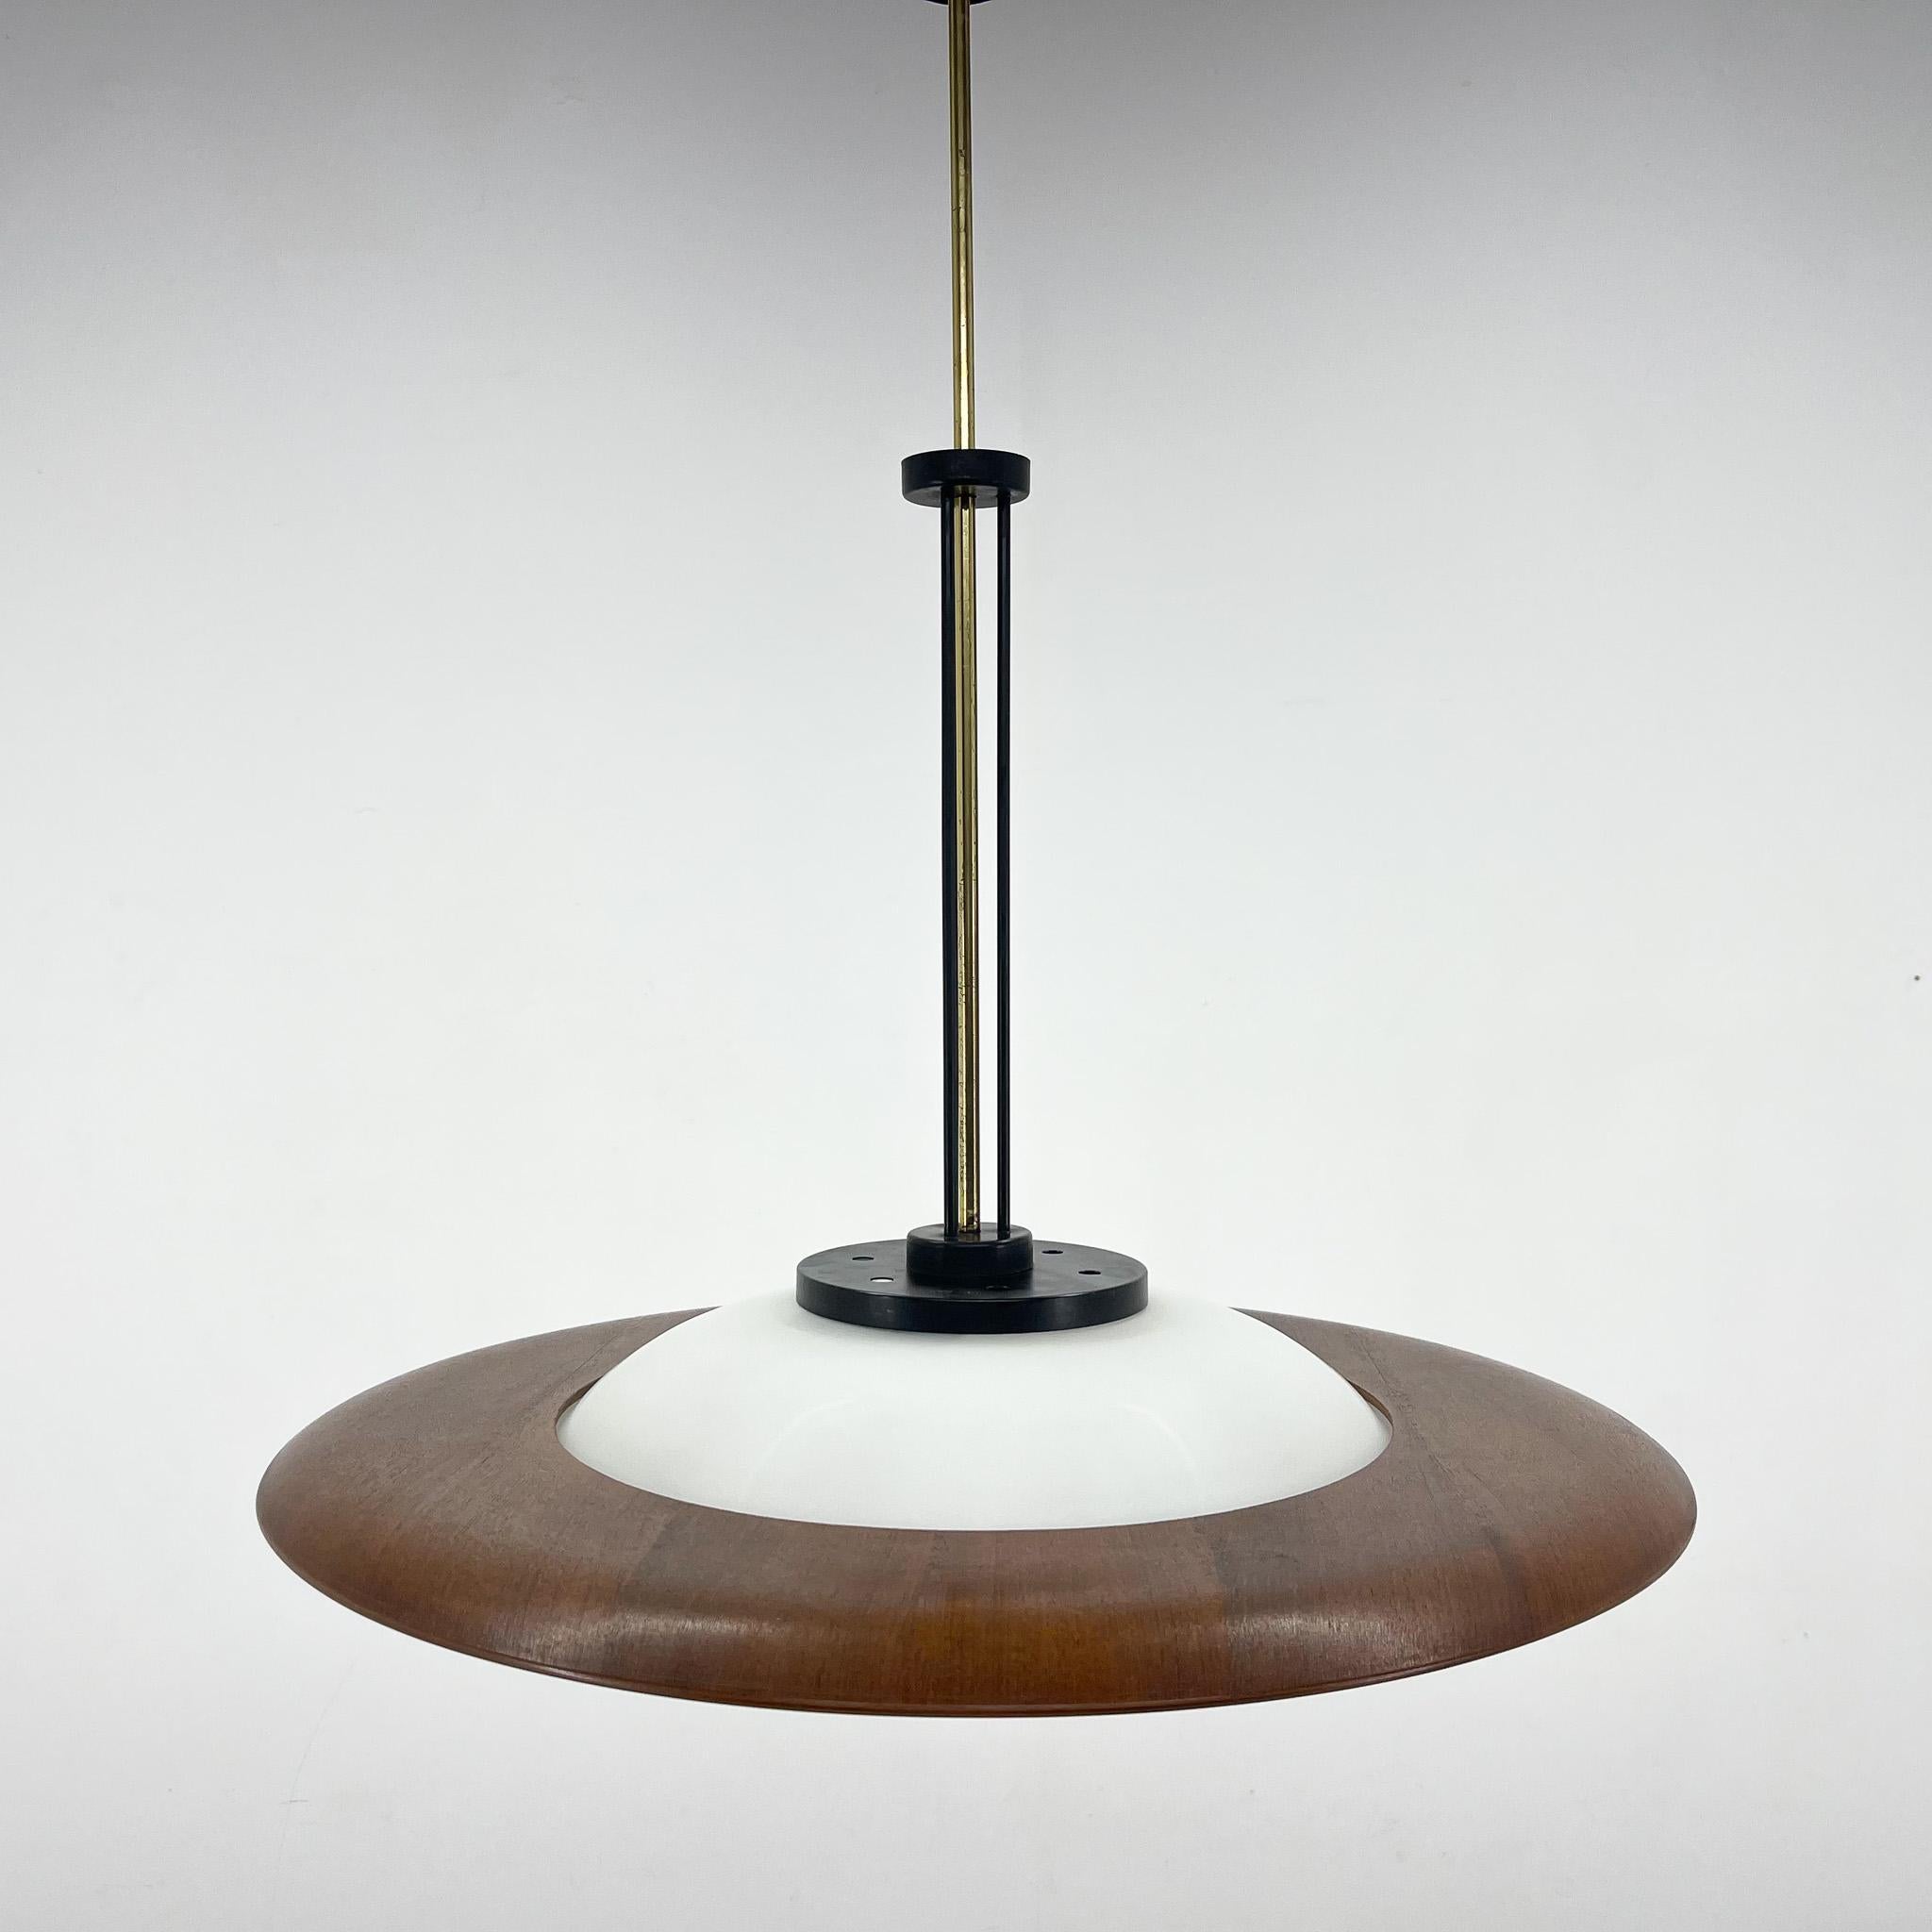 A beautiful pendant light straight from Italy, reminding of a UFO, made in the late 1960's. It is made of milk glass, teak wood, brass and metal. A beautiful timeless piece of lighting.